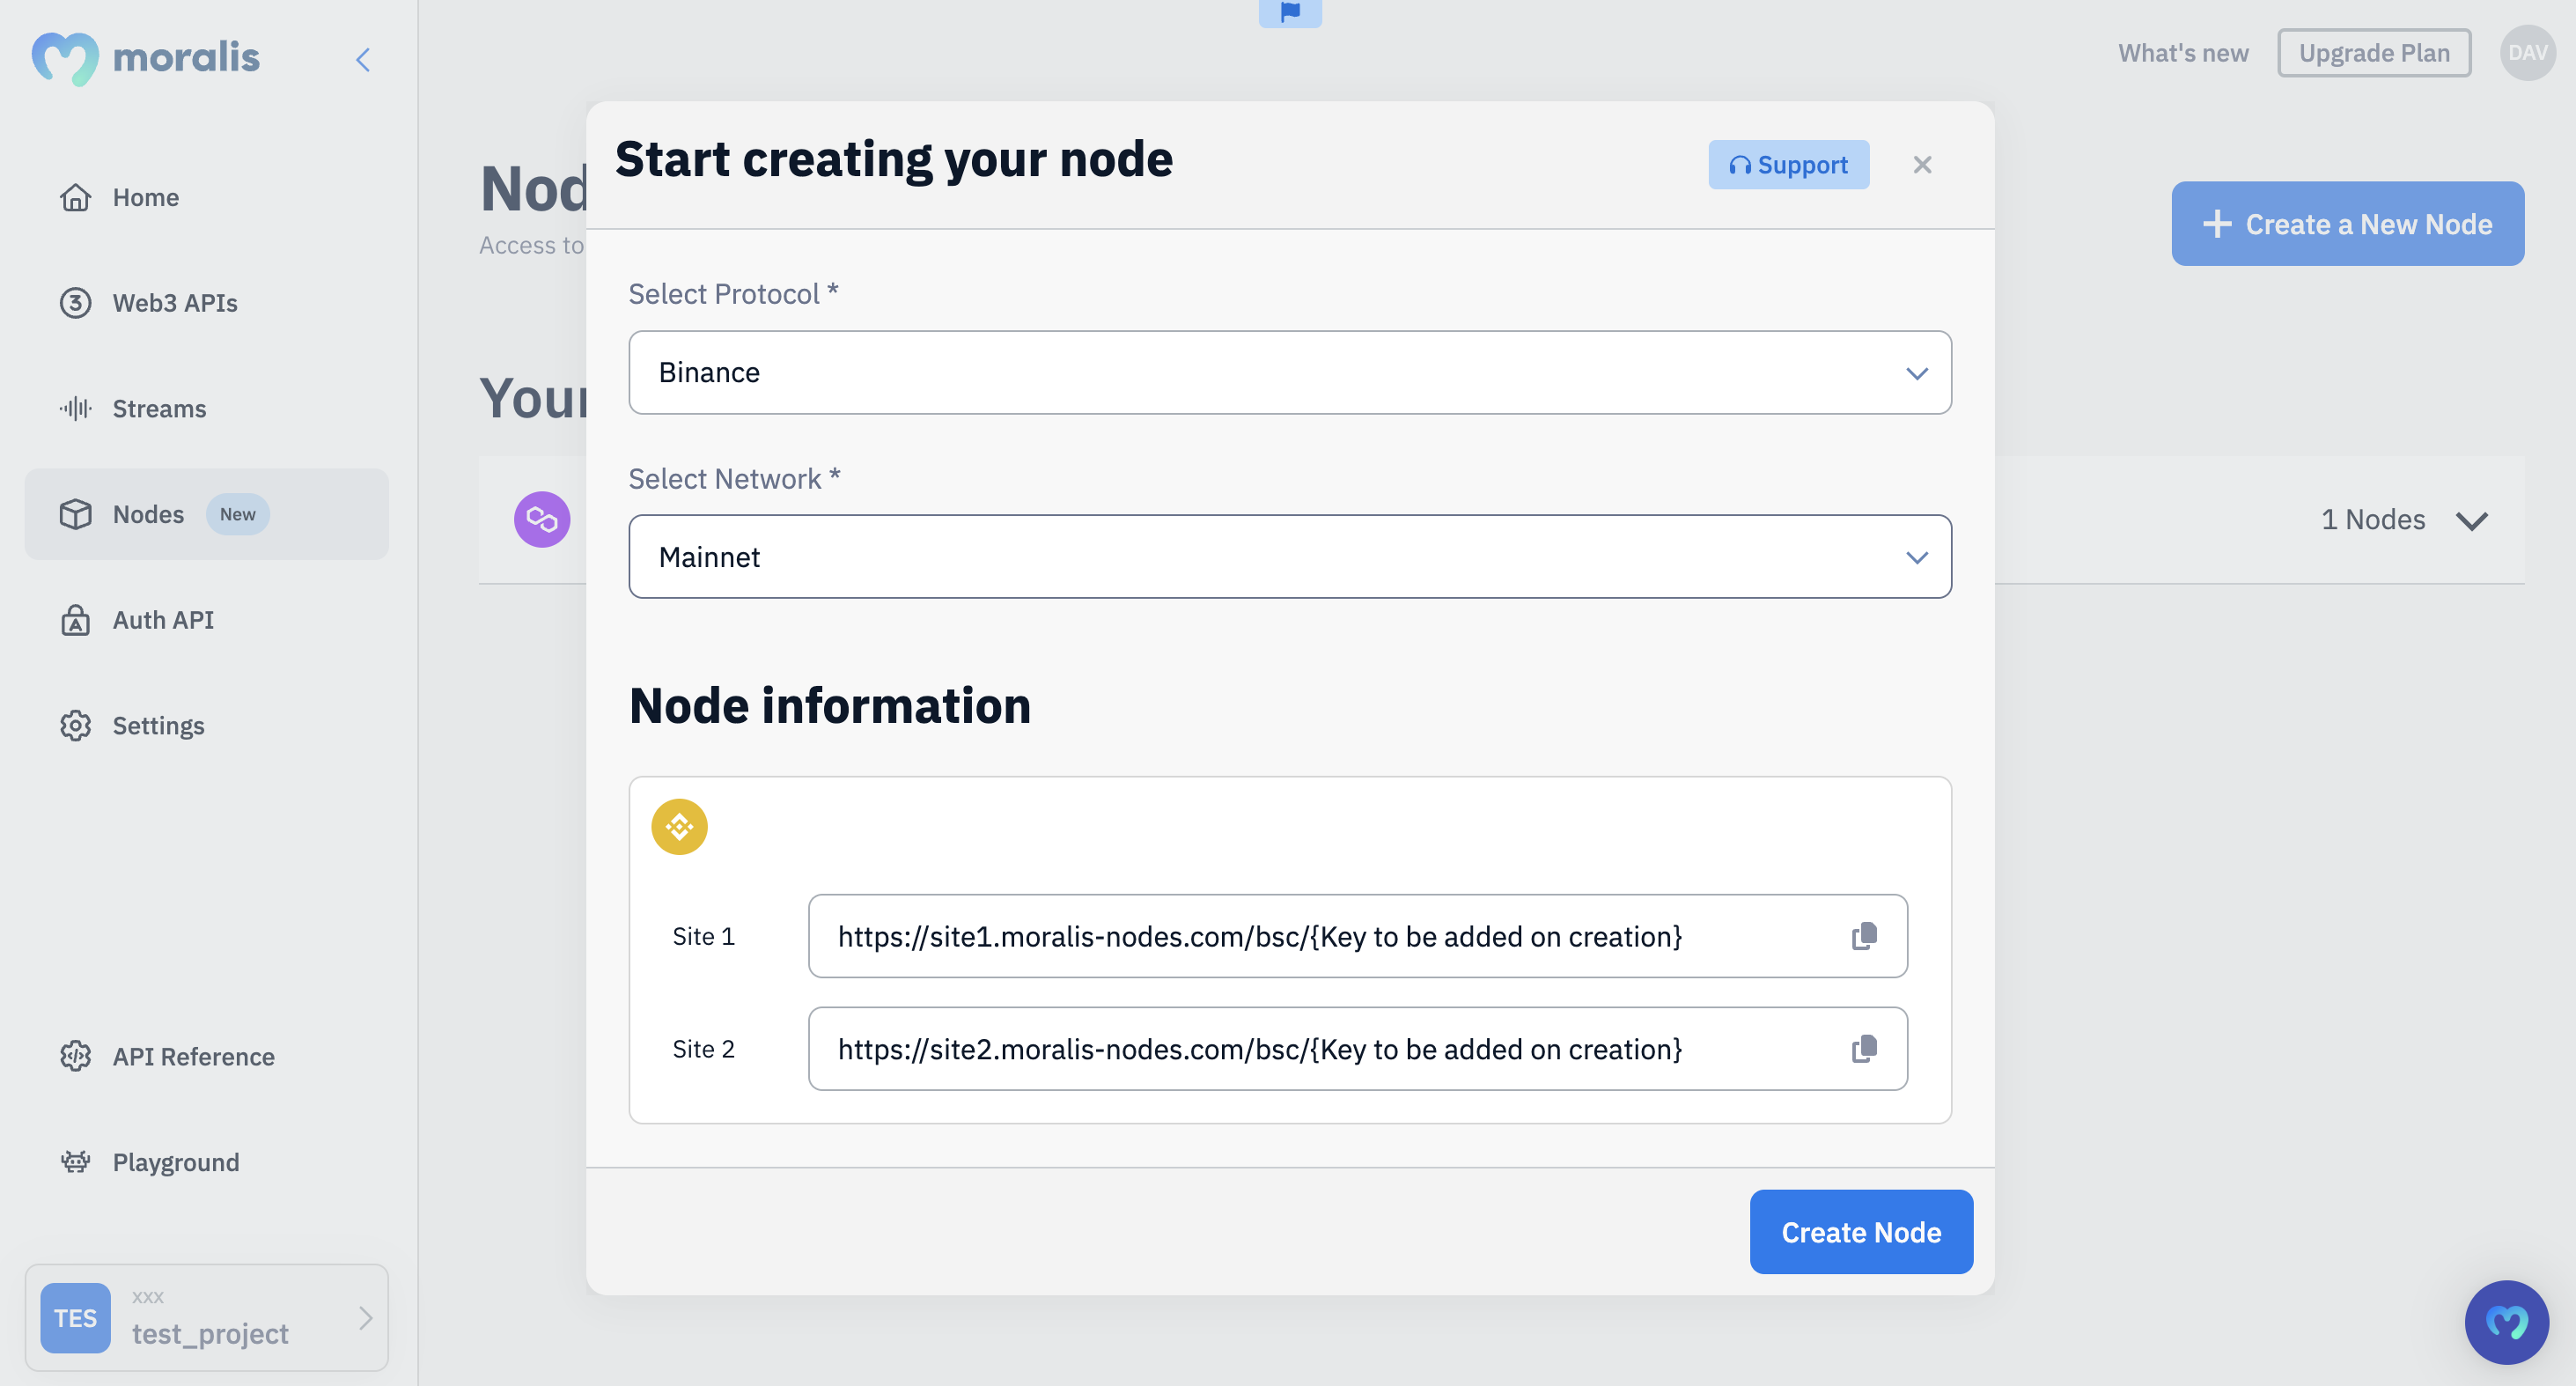 Select ”Binance" followed by ”Mainnet” and hit the ”Create Node” button: 